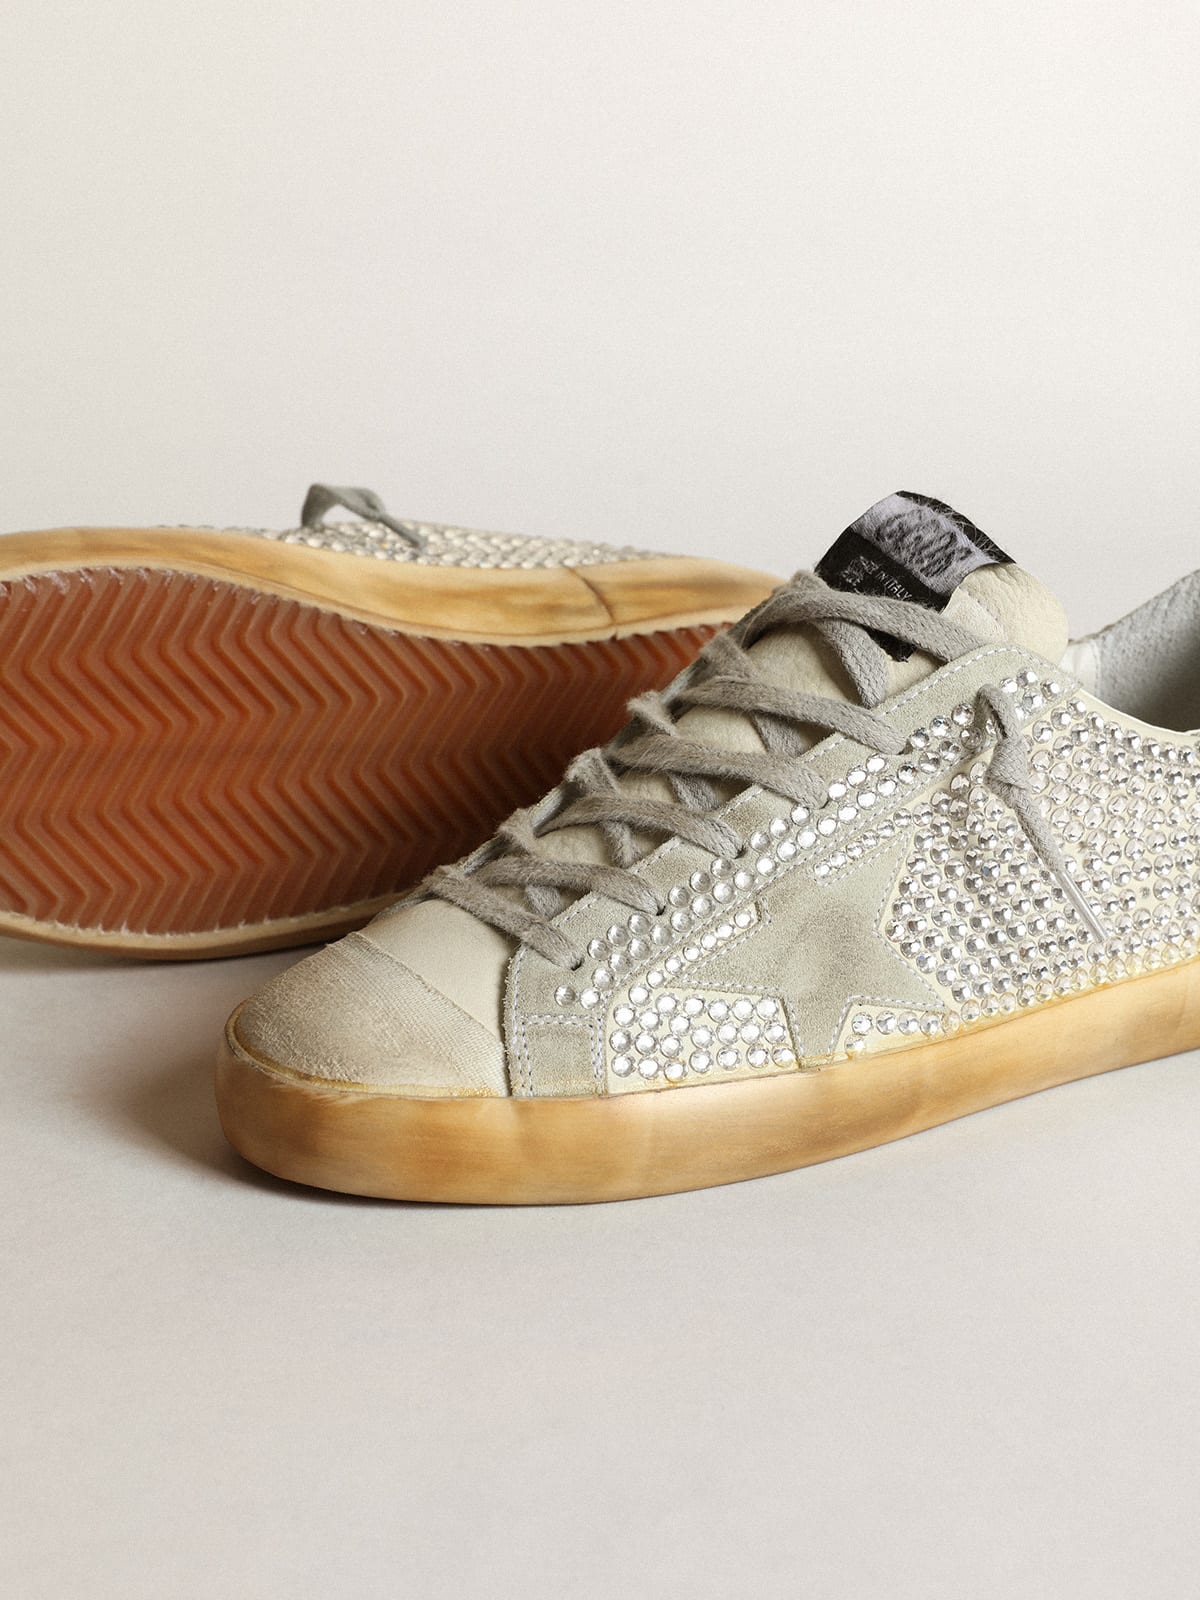 Golden Goose - Super-star sneakers in off-white nubuck and silver Swarovski crystals with ice-gray suede star in 